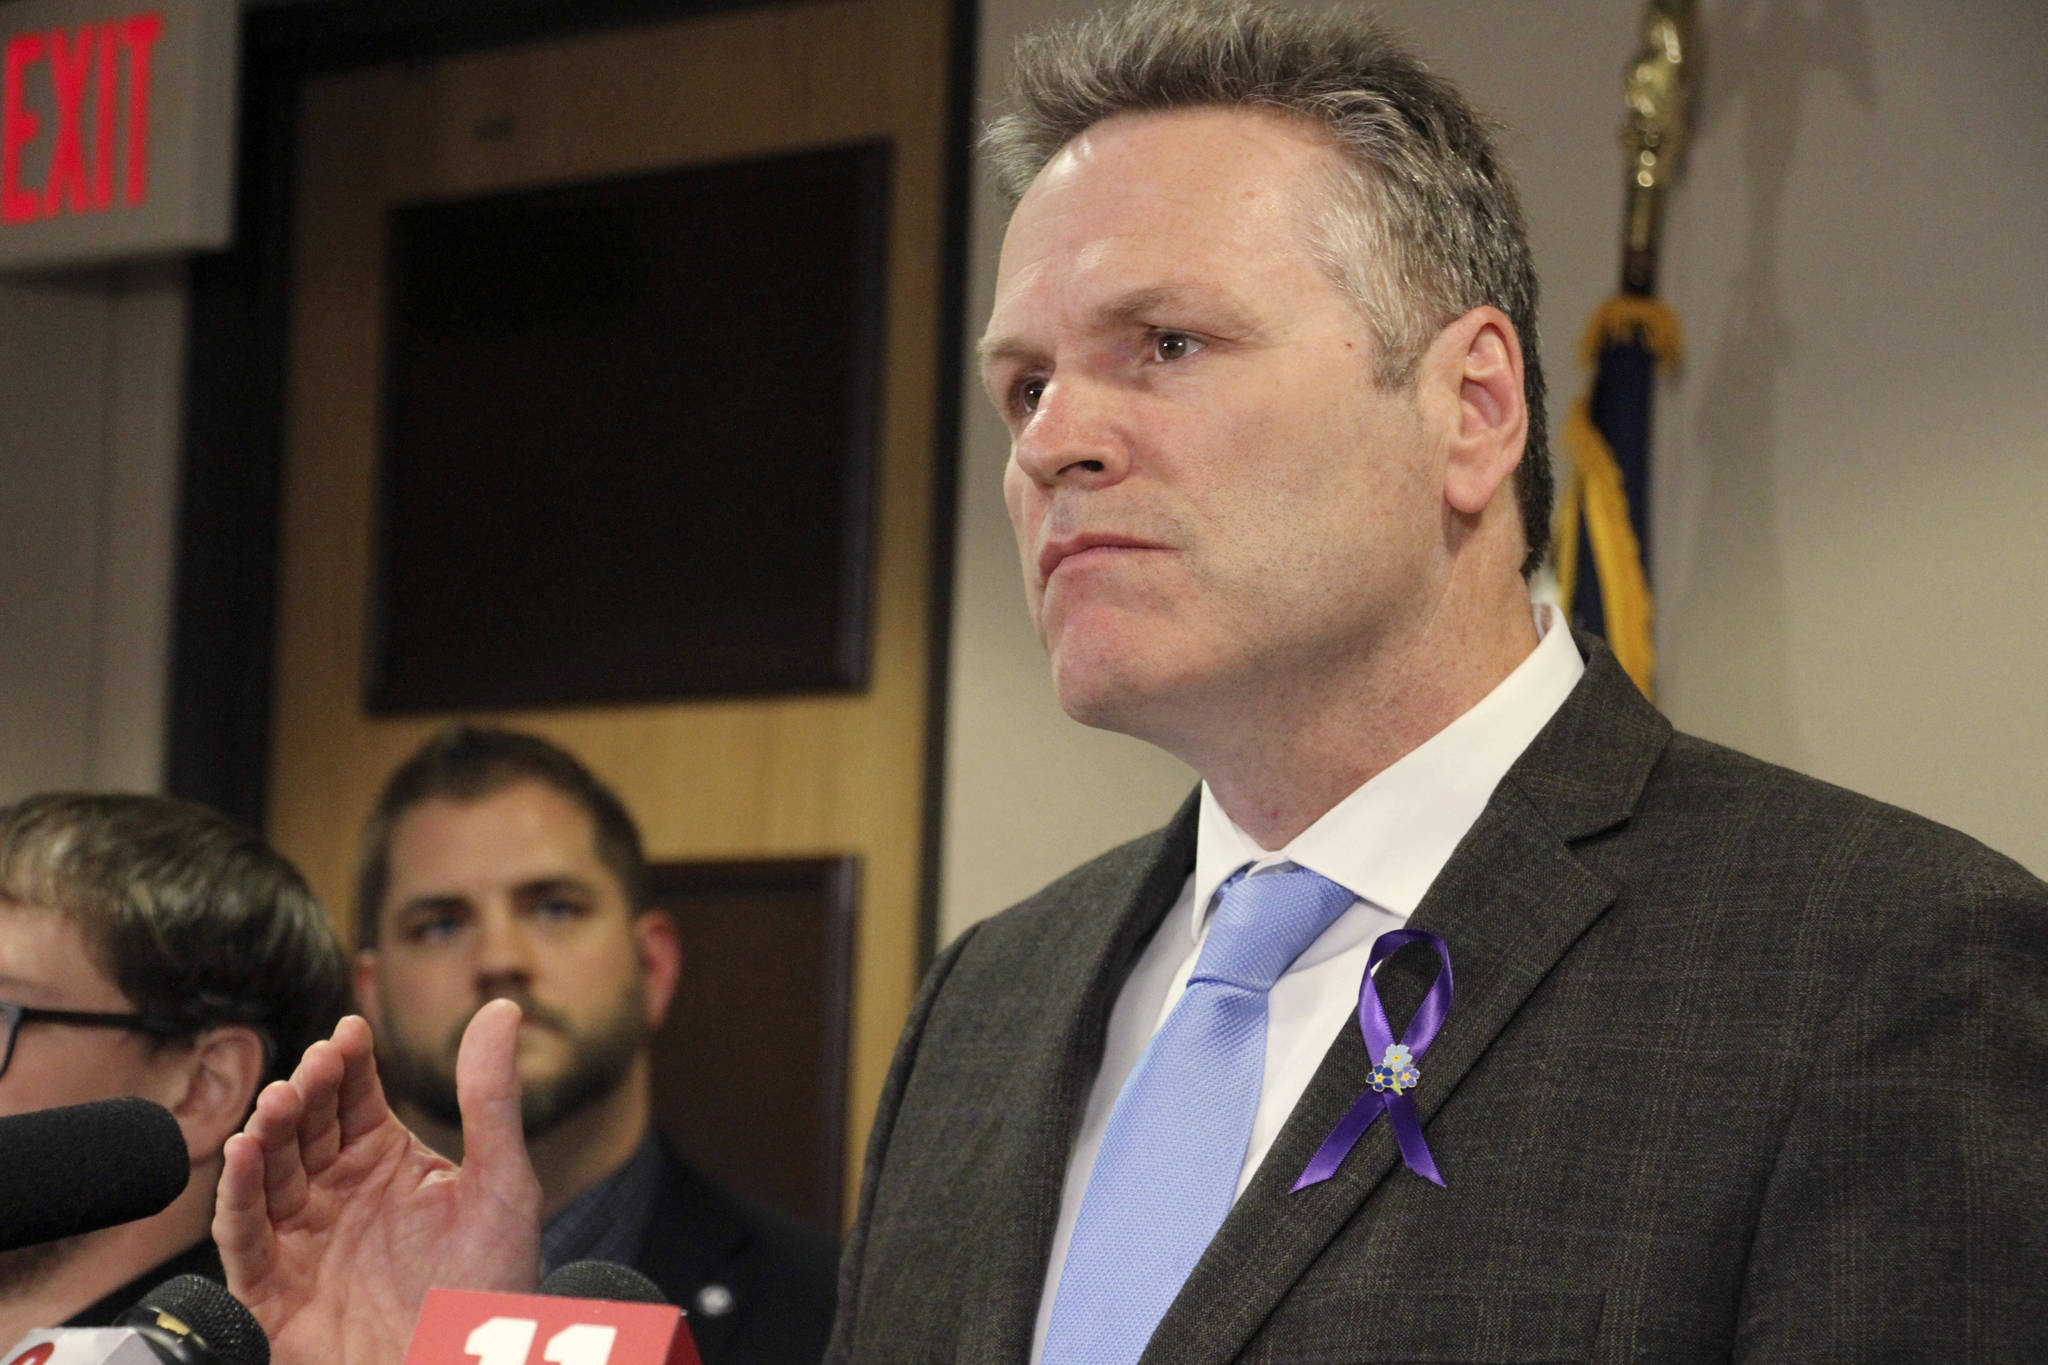 Gov. Mike Dunleavy speaks during a news conference in Anchorage in March. Dunleavy faces criticism for his handling of COVID-19, from those who think he’s not doing enough to address rising case counts to those who think he’s been overreaching. (AP Photo / Mark Thiessen)